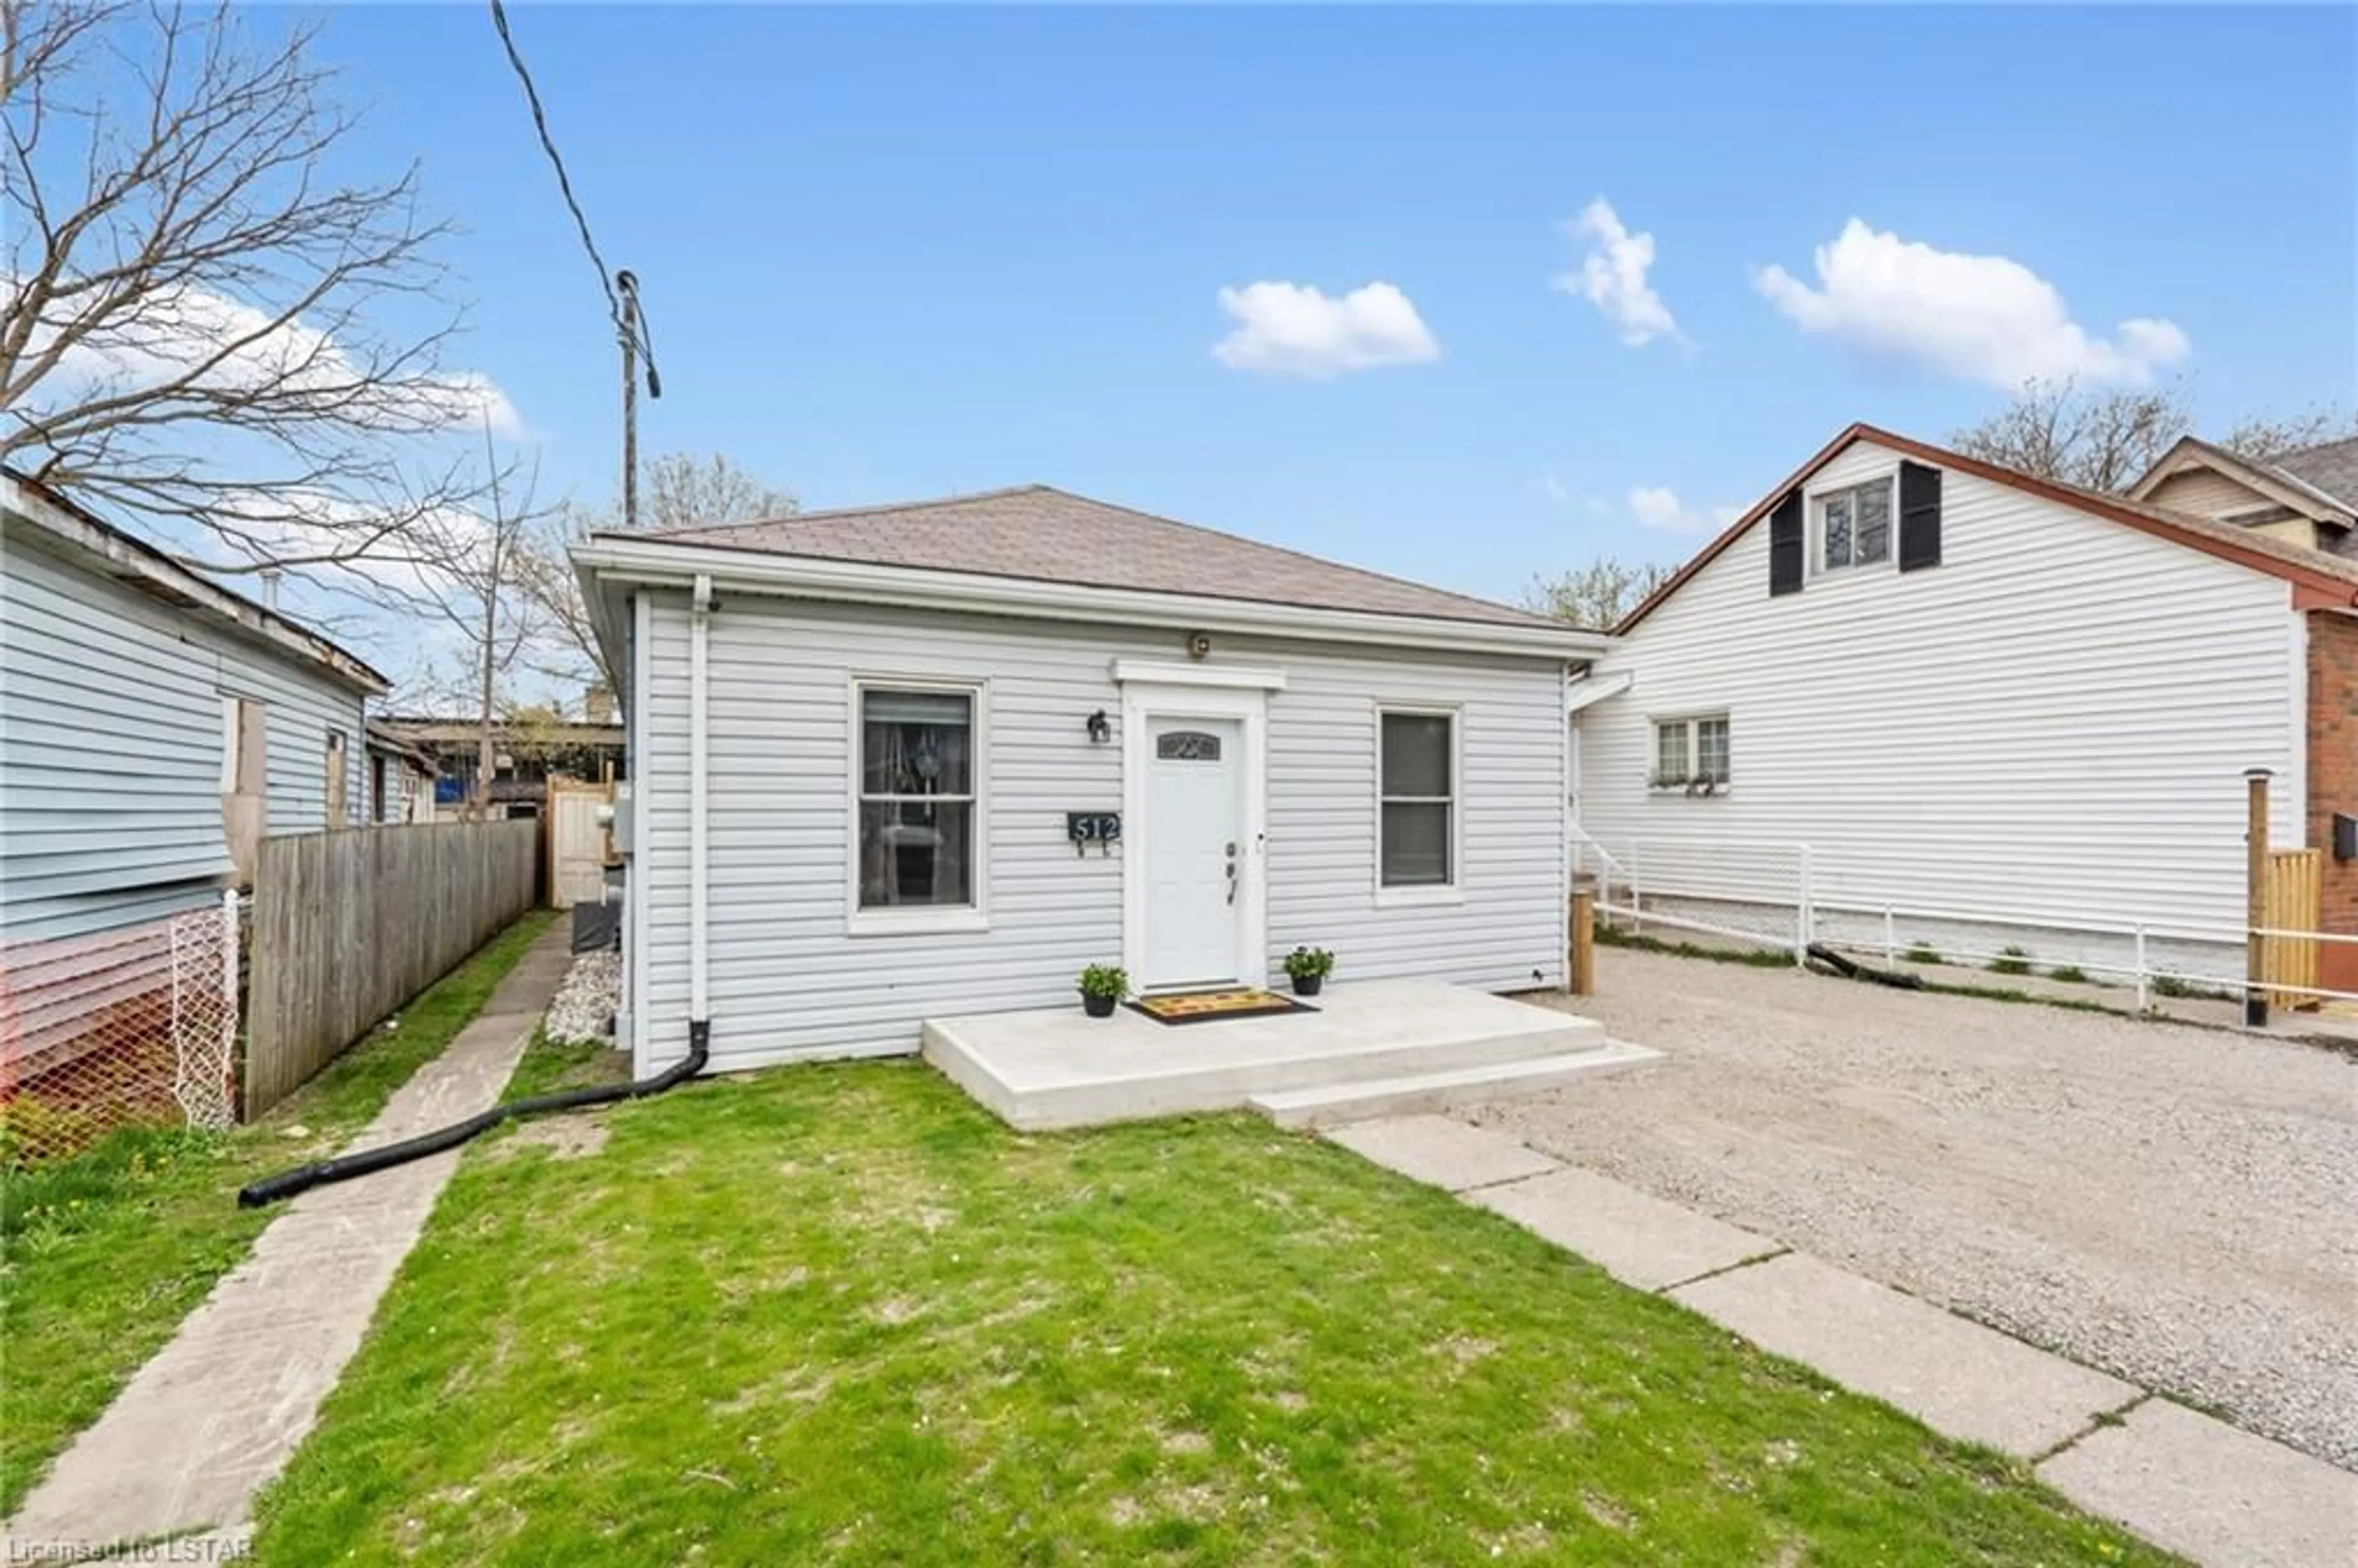 Frontside or backside of a home for 512 Simcoe St, London Ontario N6B 1K4